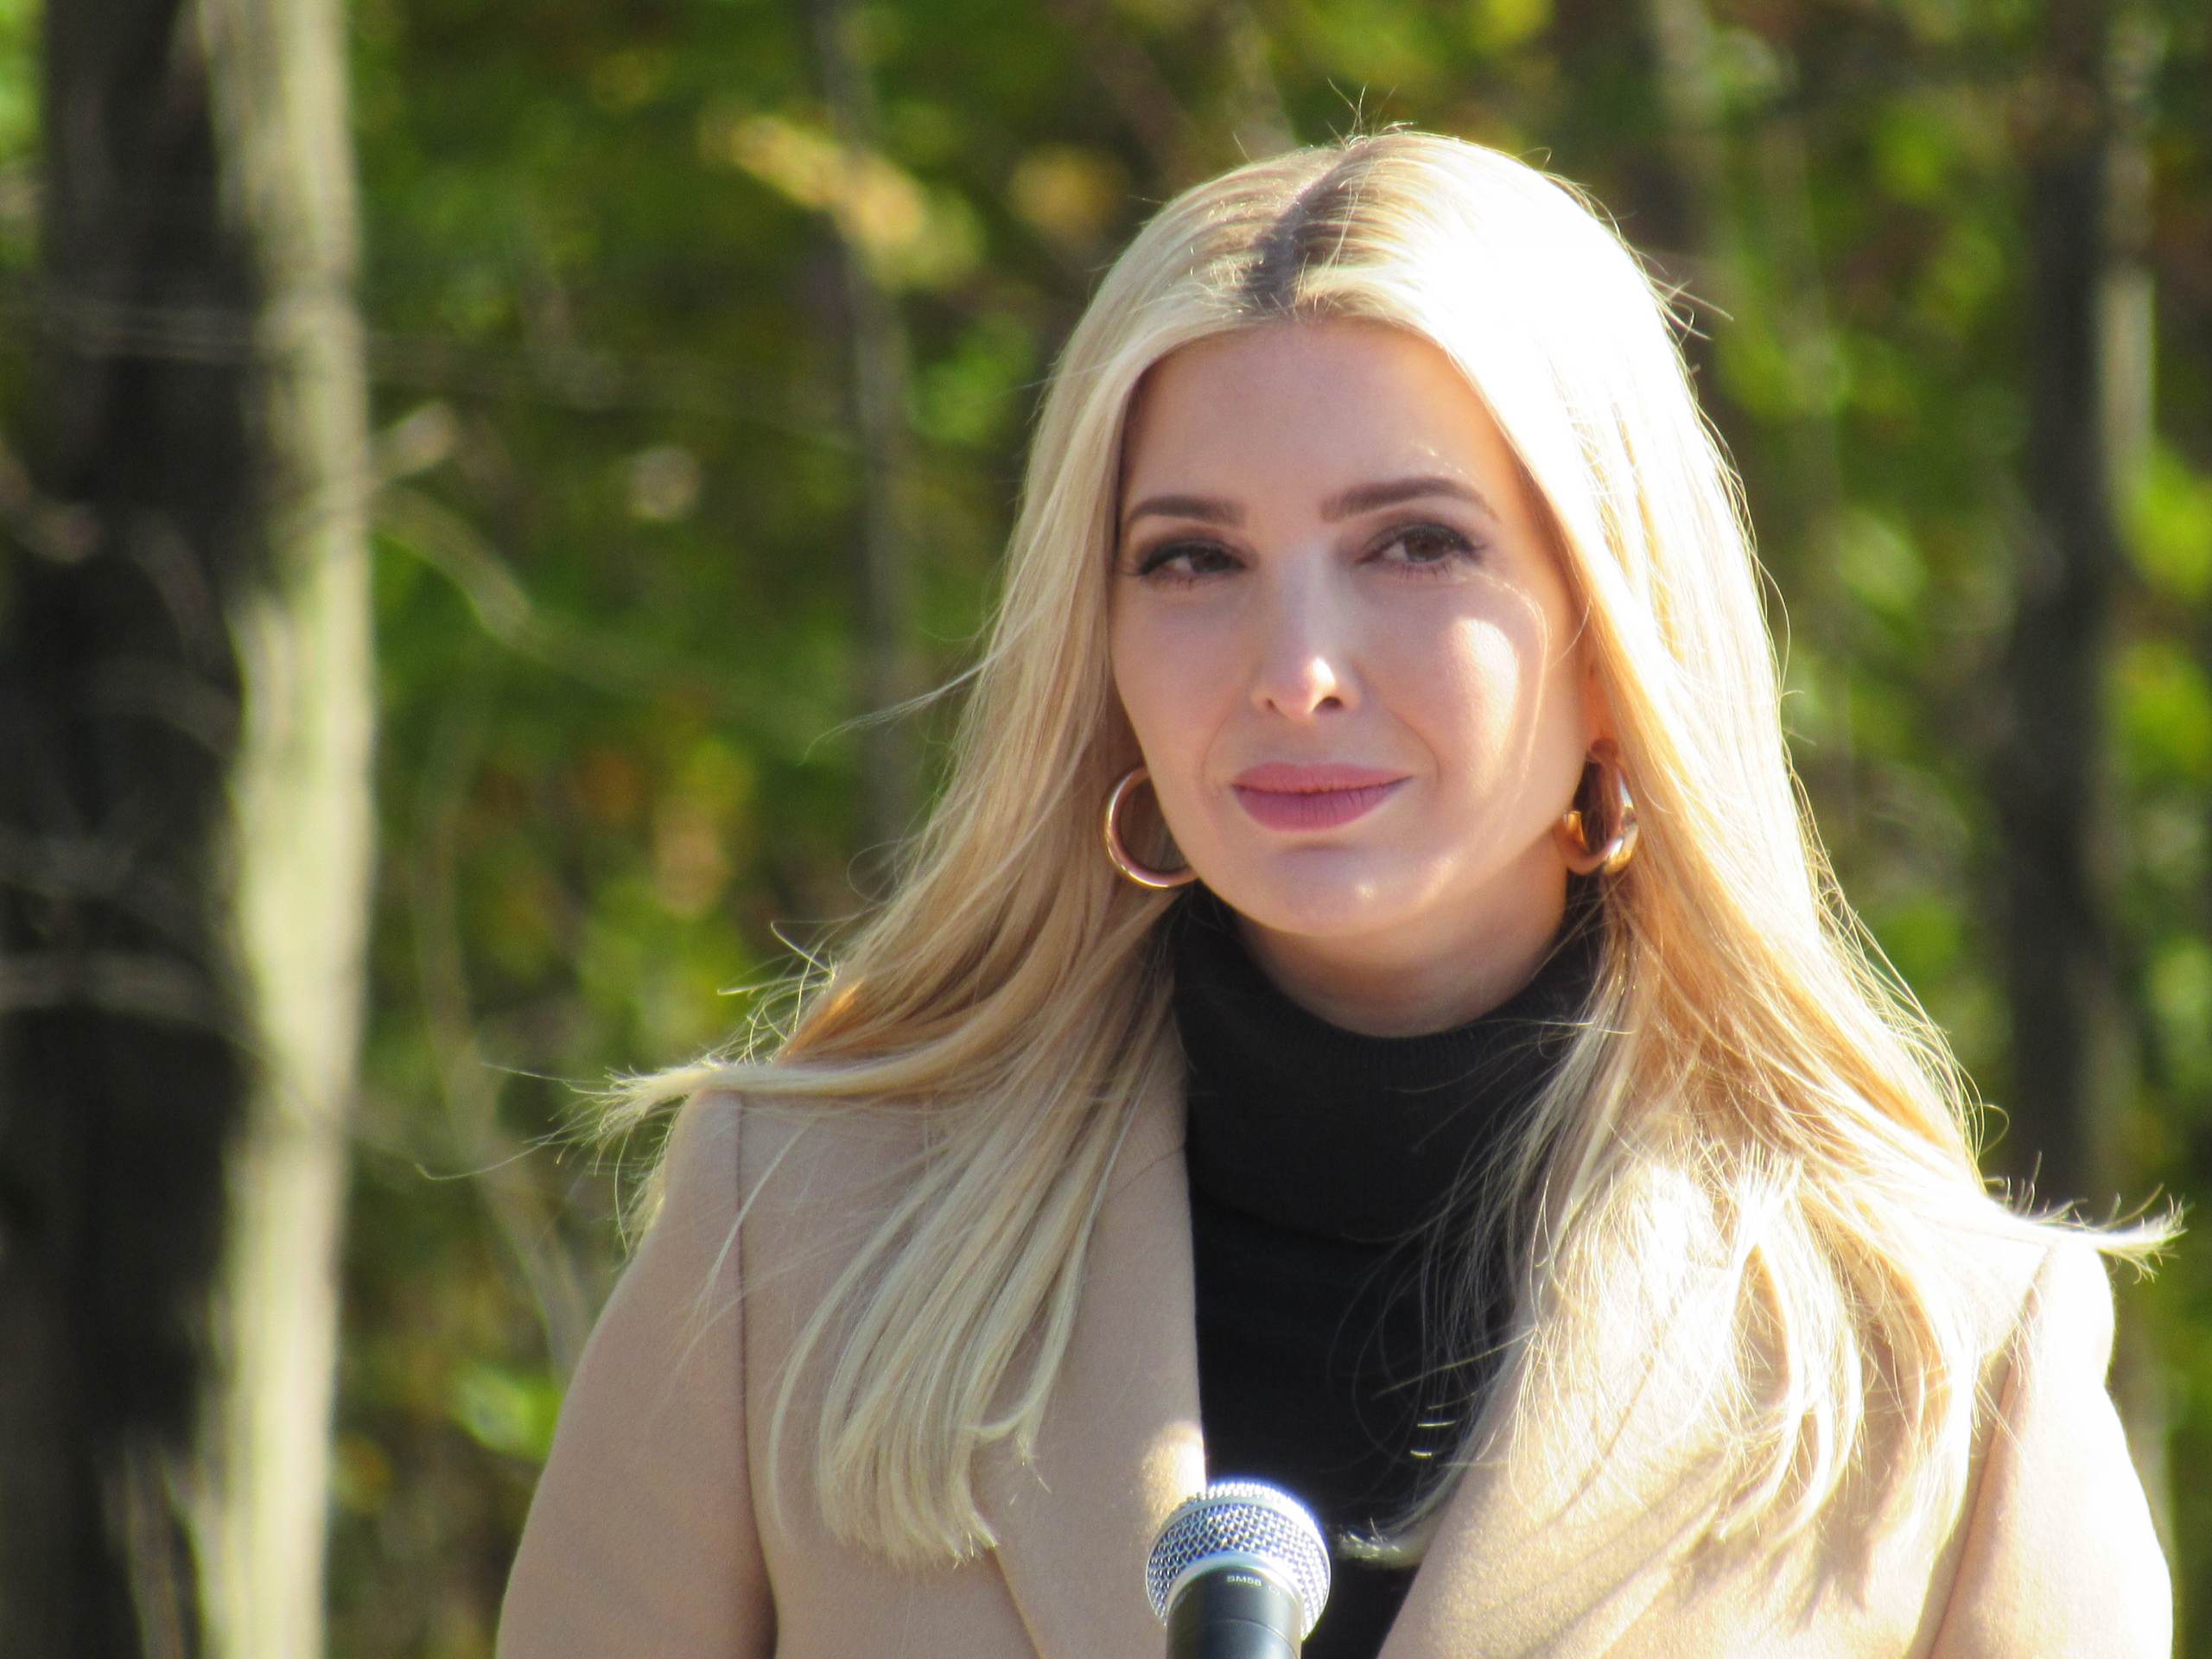 REPORT: Ivanka Trump Made Secret Trip to Maui to Help Distribute Food to Fire Victims | The Gateway Pundit